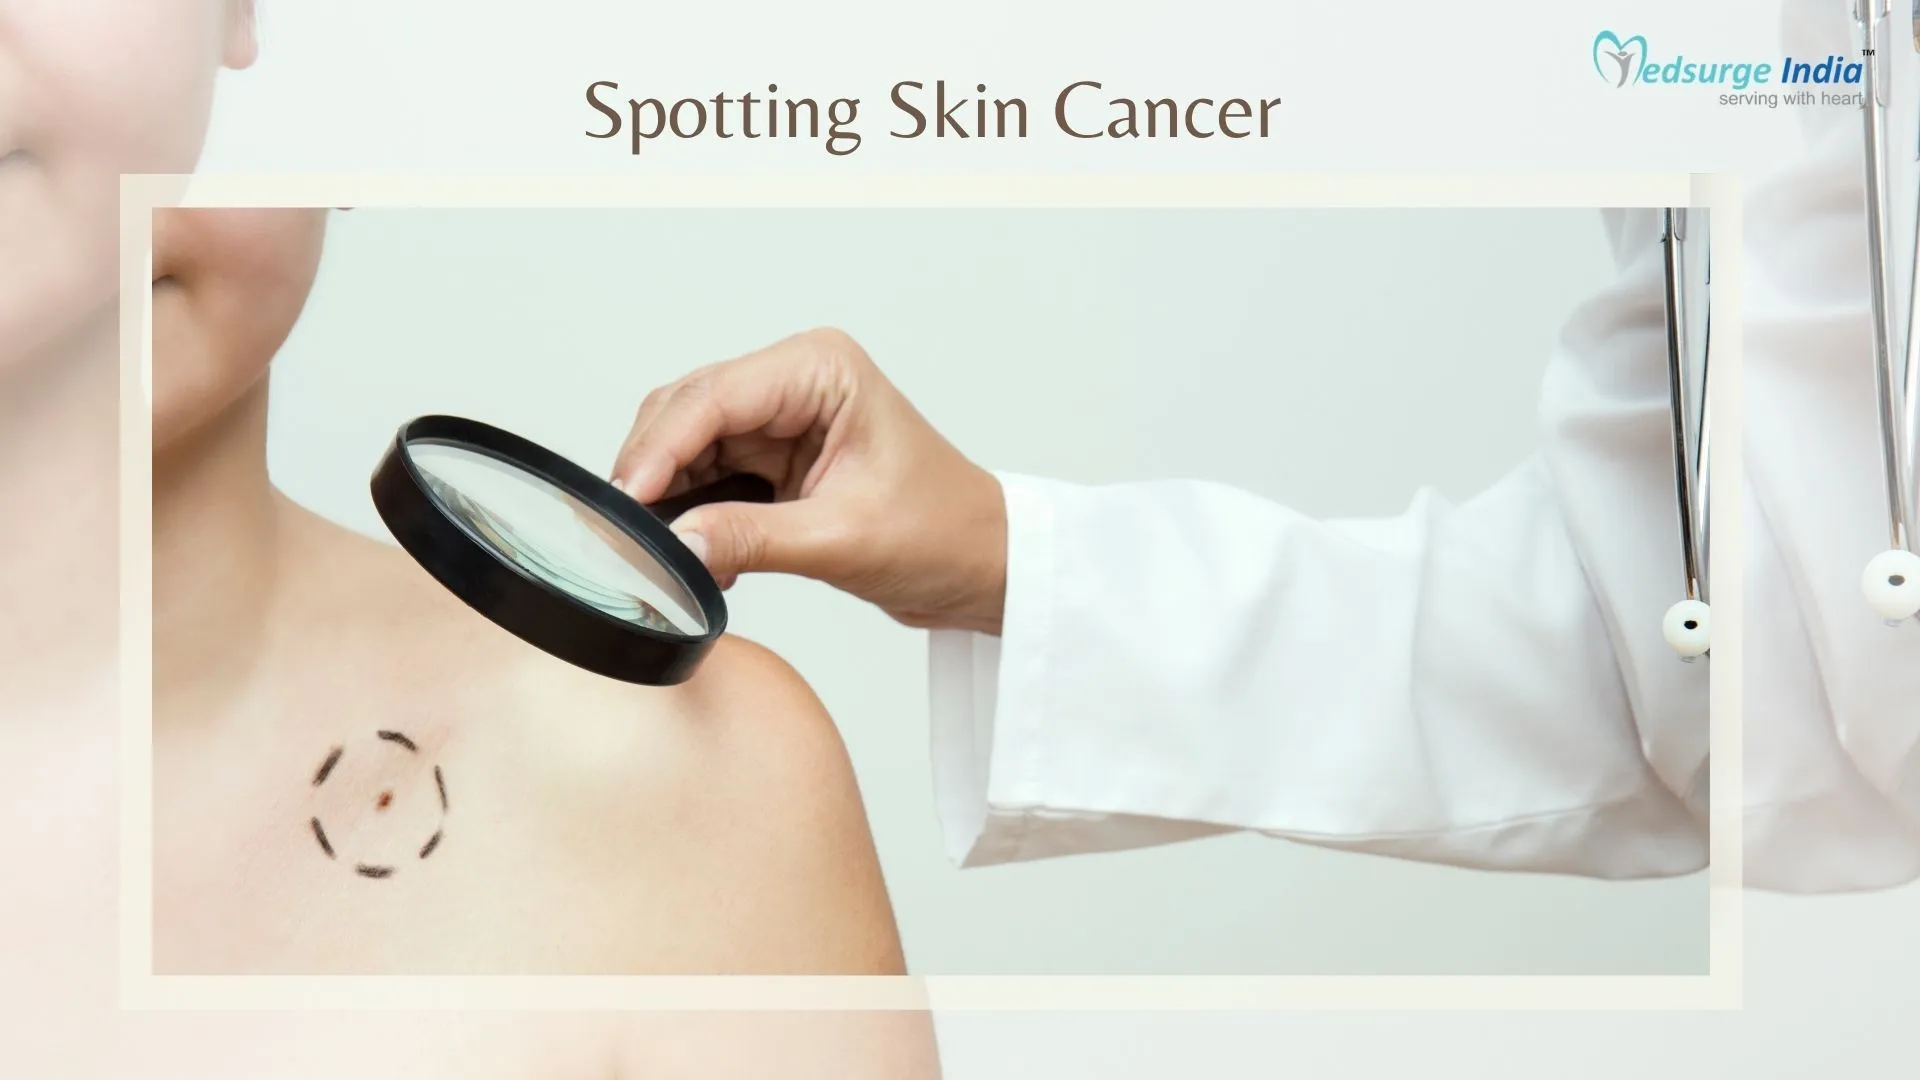 Spotting Skin Cancer: Know the Warning Signs